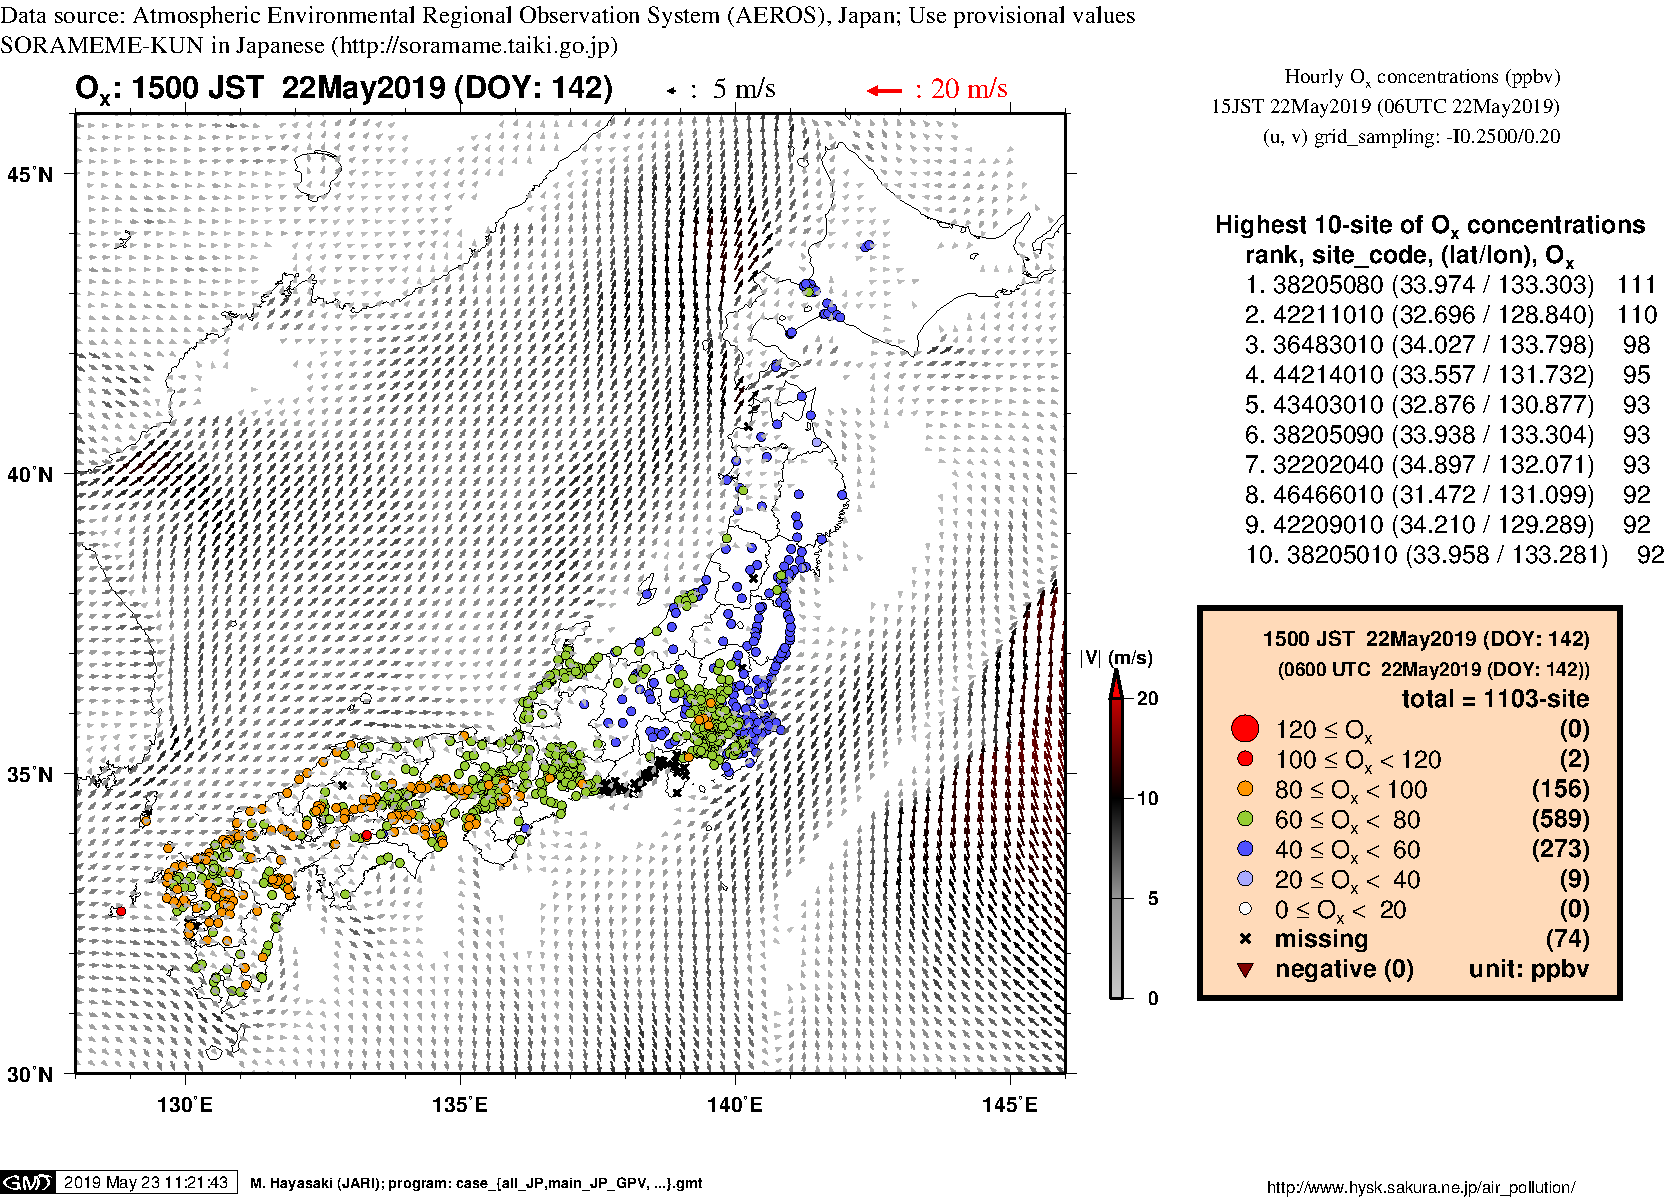 Ox concentration in mainland Japan (15JST 22May2019)